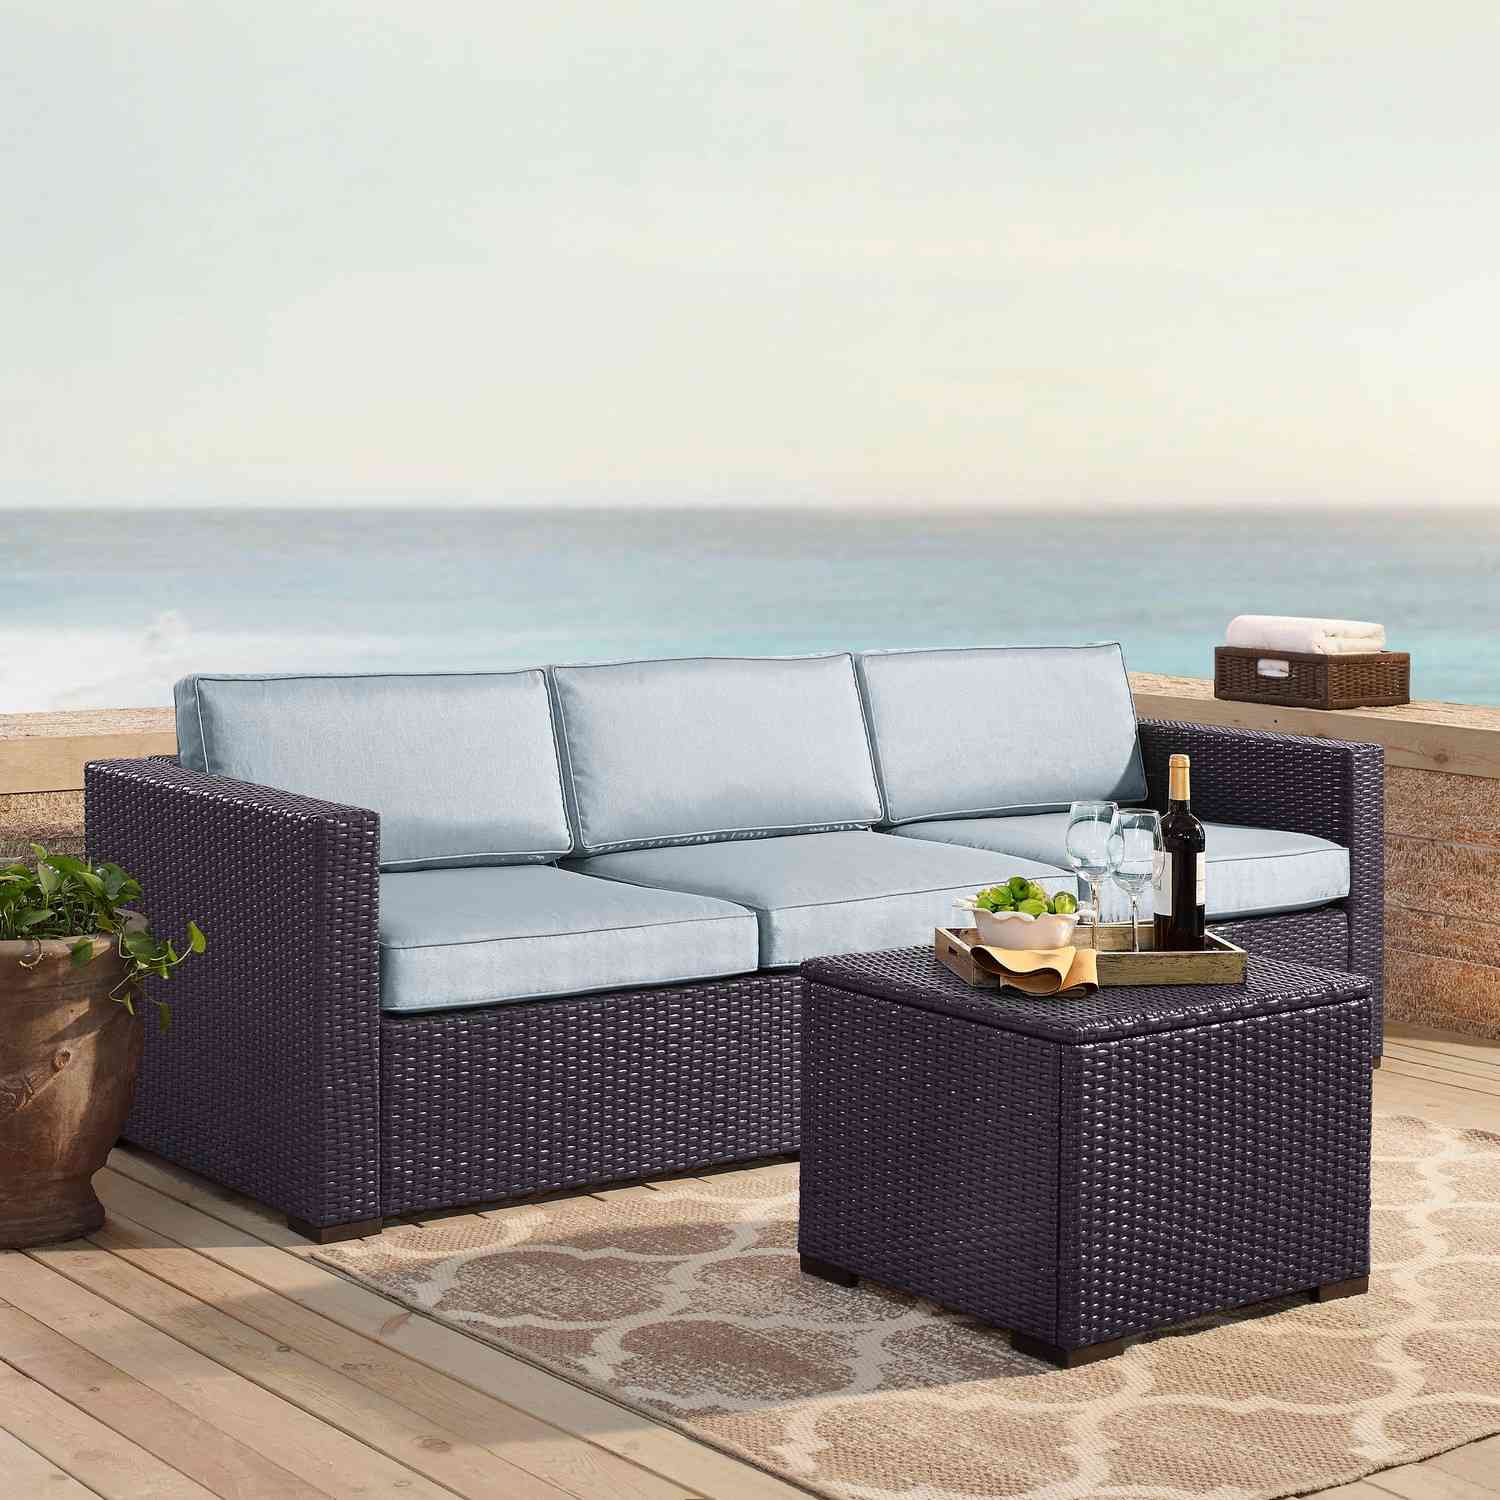 Crosley Biscayne 3-PC Outdoor Wicker Sectional Set - Loveseat, Corner Chair, Coffee Table - Mist/Brown